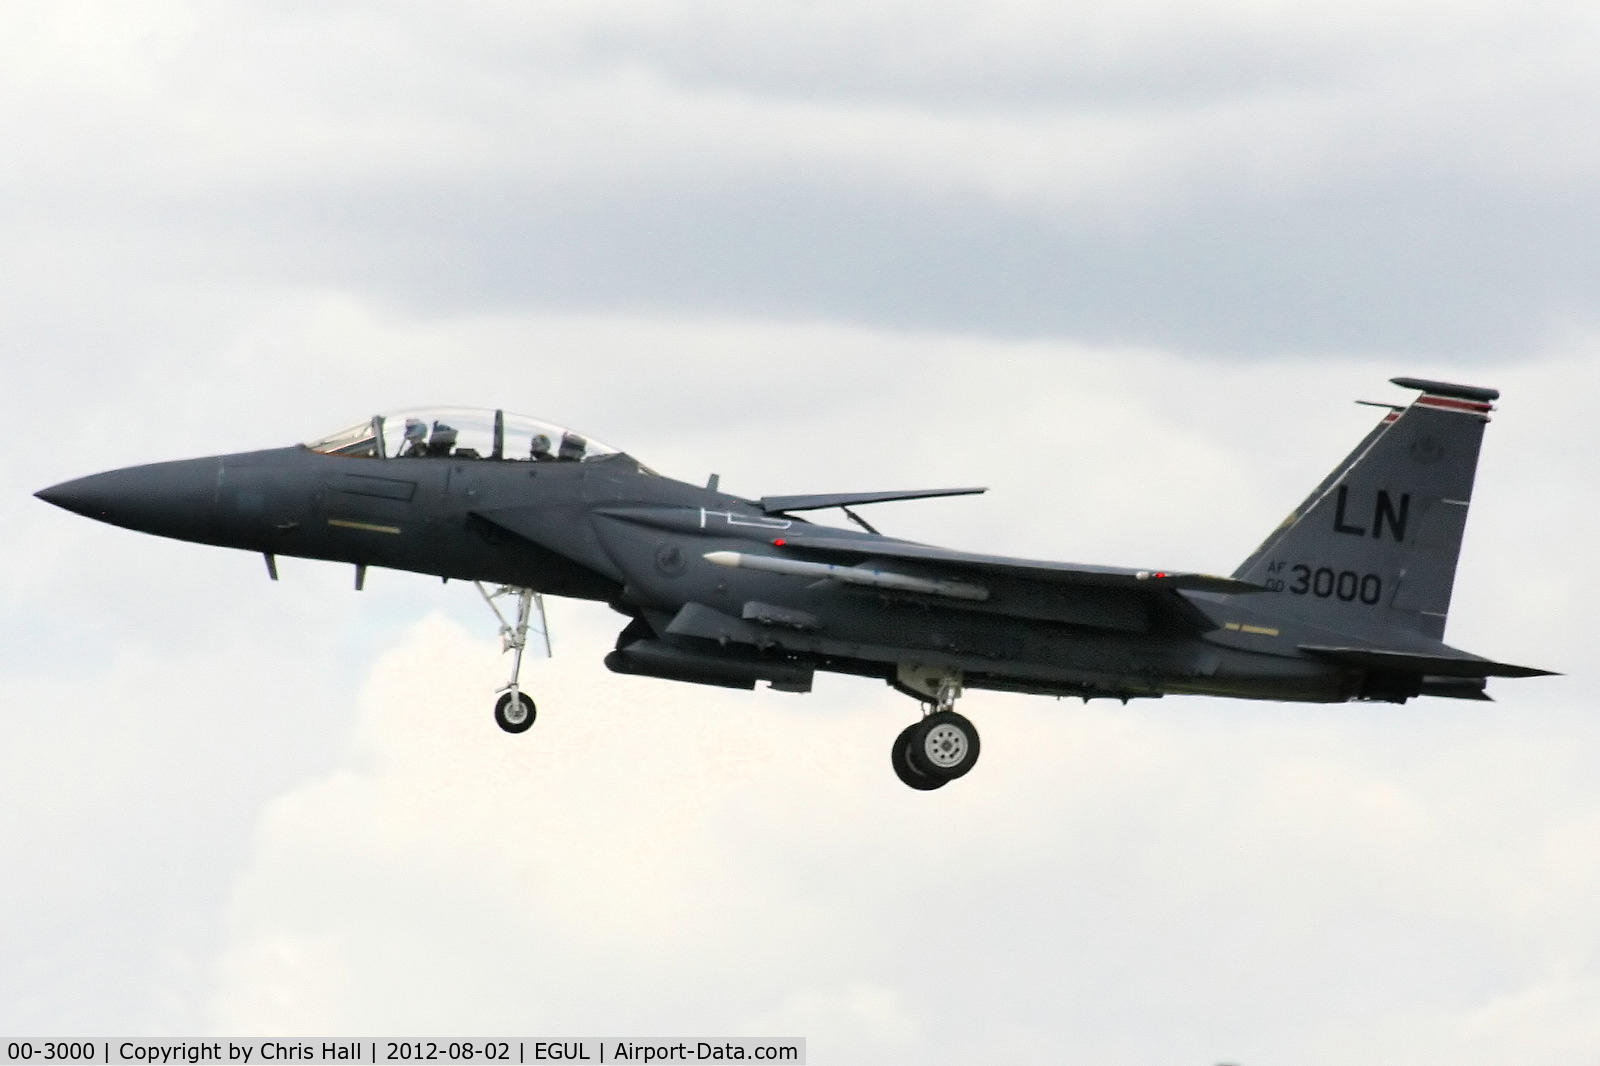 00-3000, 2000 McDonnell Douglas F-15E Strike Eagle C/N 1366/E227, 494th Fighter Squadron “The Panthers”